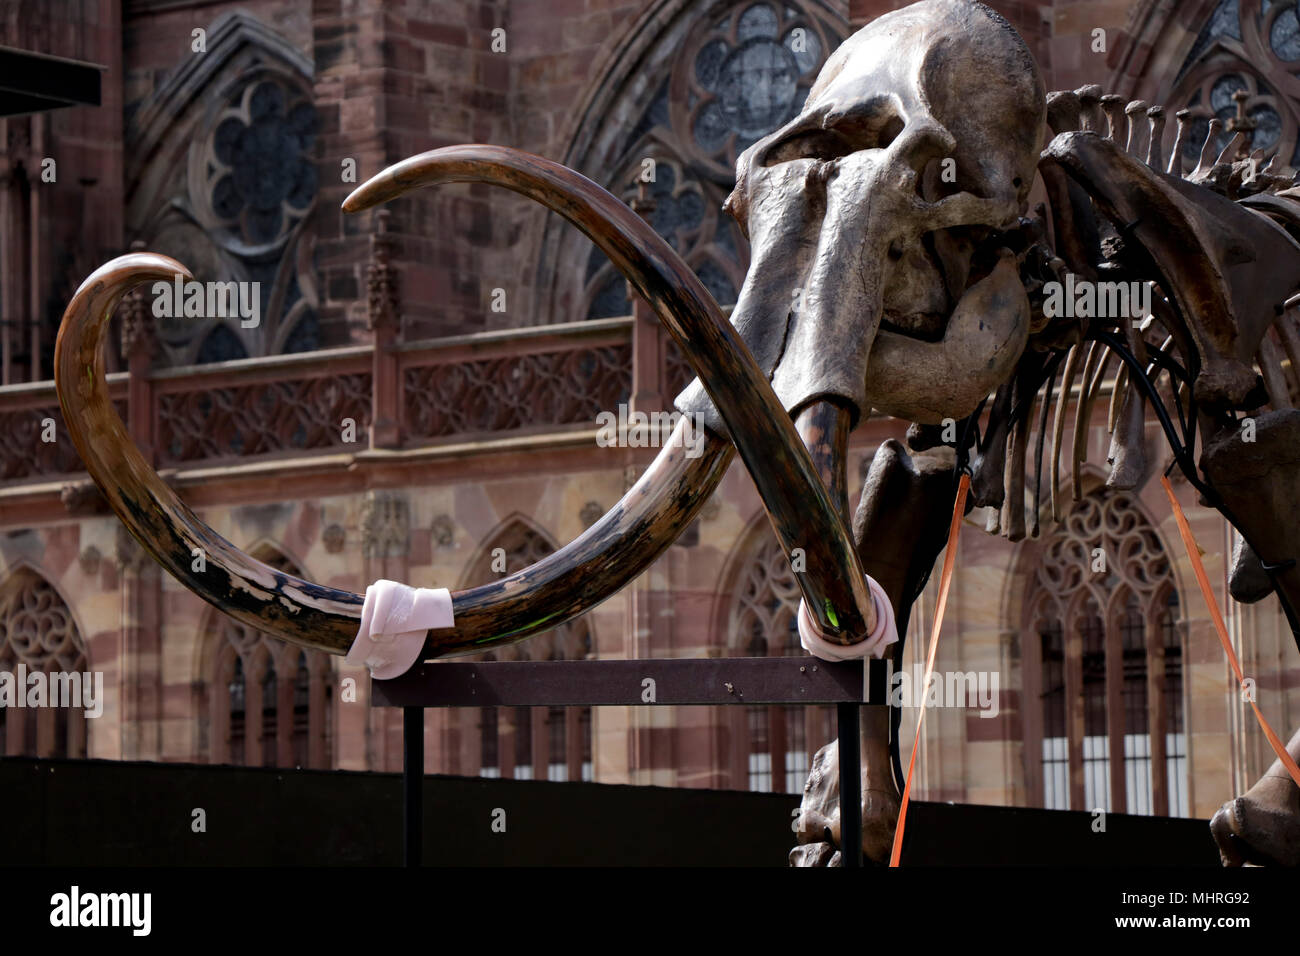 A closer look at Jacques Rival’s installation 'Mammuthus Volantes' (Flying Mammoth) seen being placed next to the water fountains in Cathedral Square in Strasbourg during the 'Industrie Magnifique' festival. The complete mammoth skeleton was acquired at an auction by the company ‘Soprema’ and its size are 3.4 metres in length, 5.4 metres in height and its weighs is around 1400 kilograms. Stock Photo